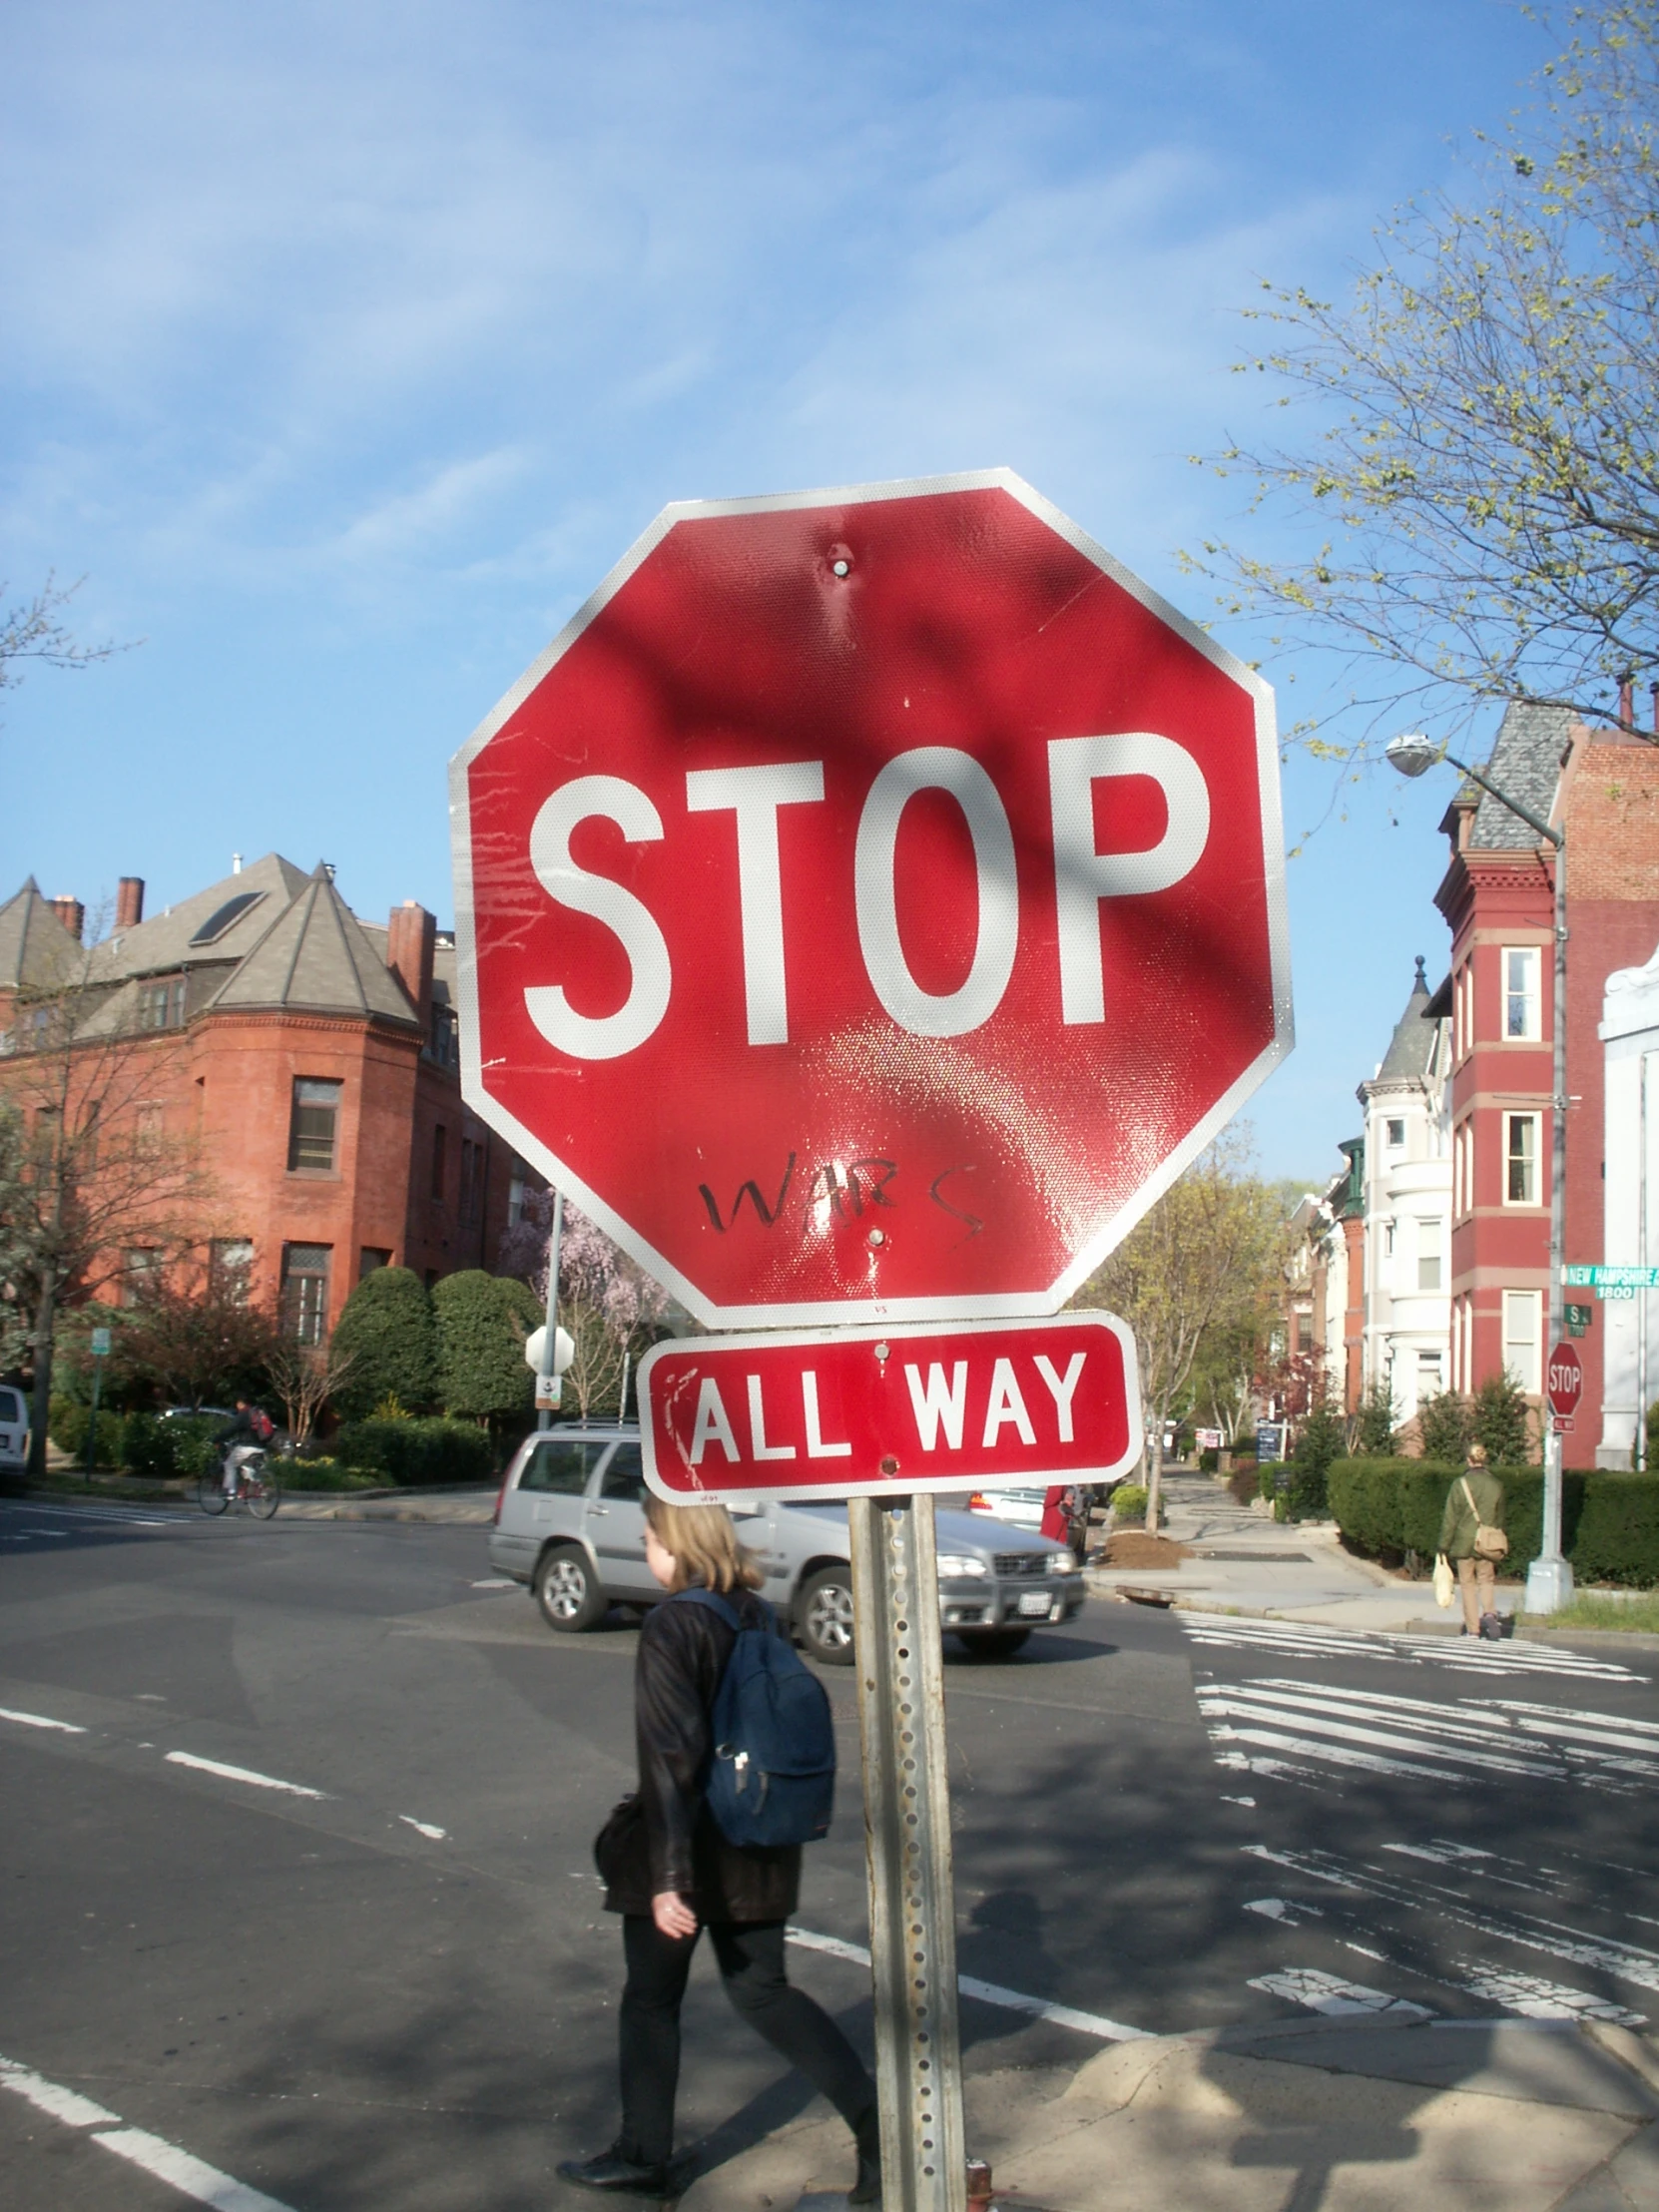 a red stop sign with all way written underneath it